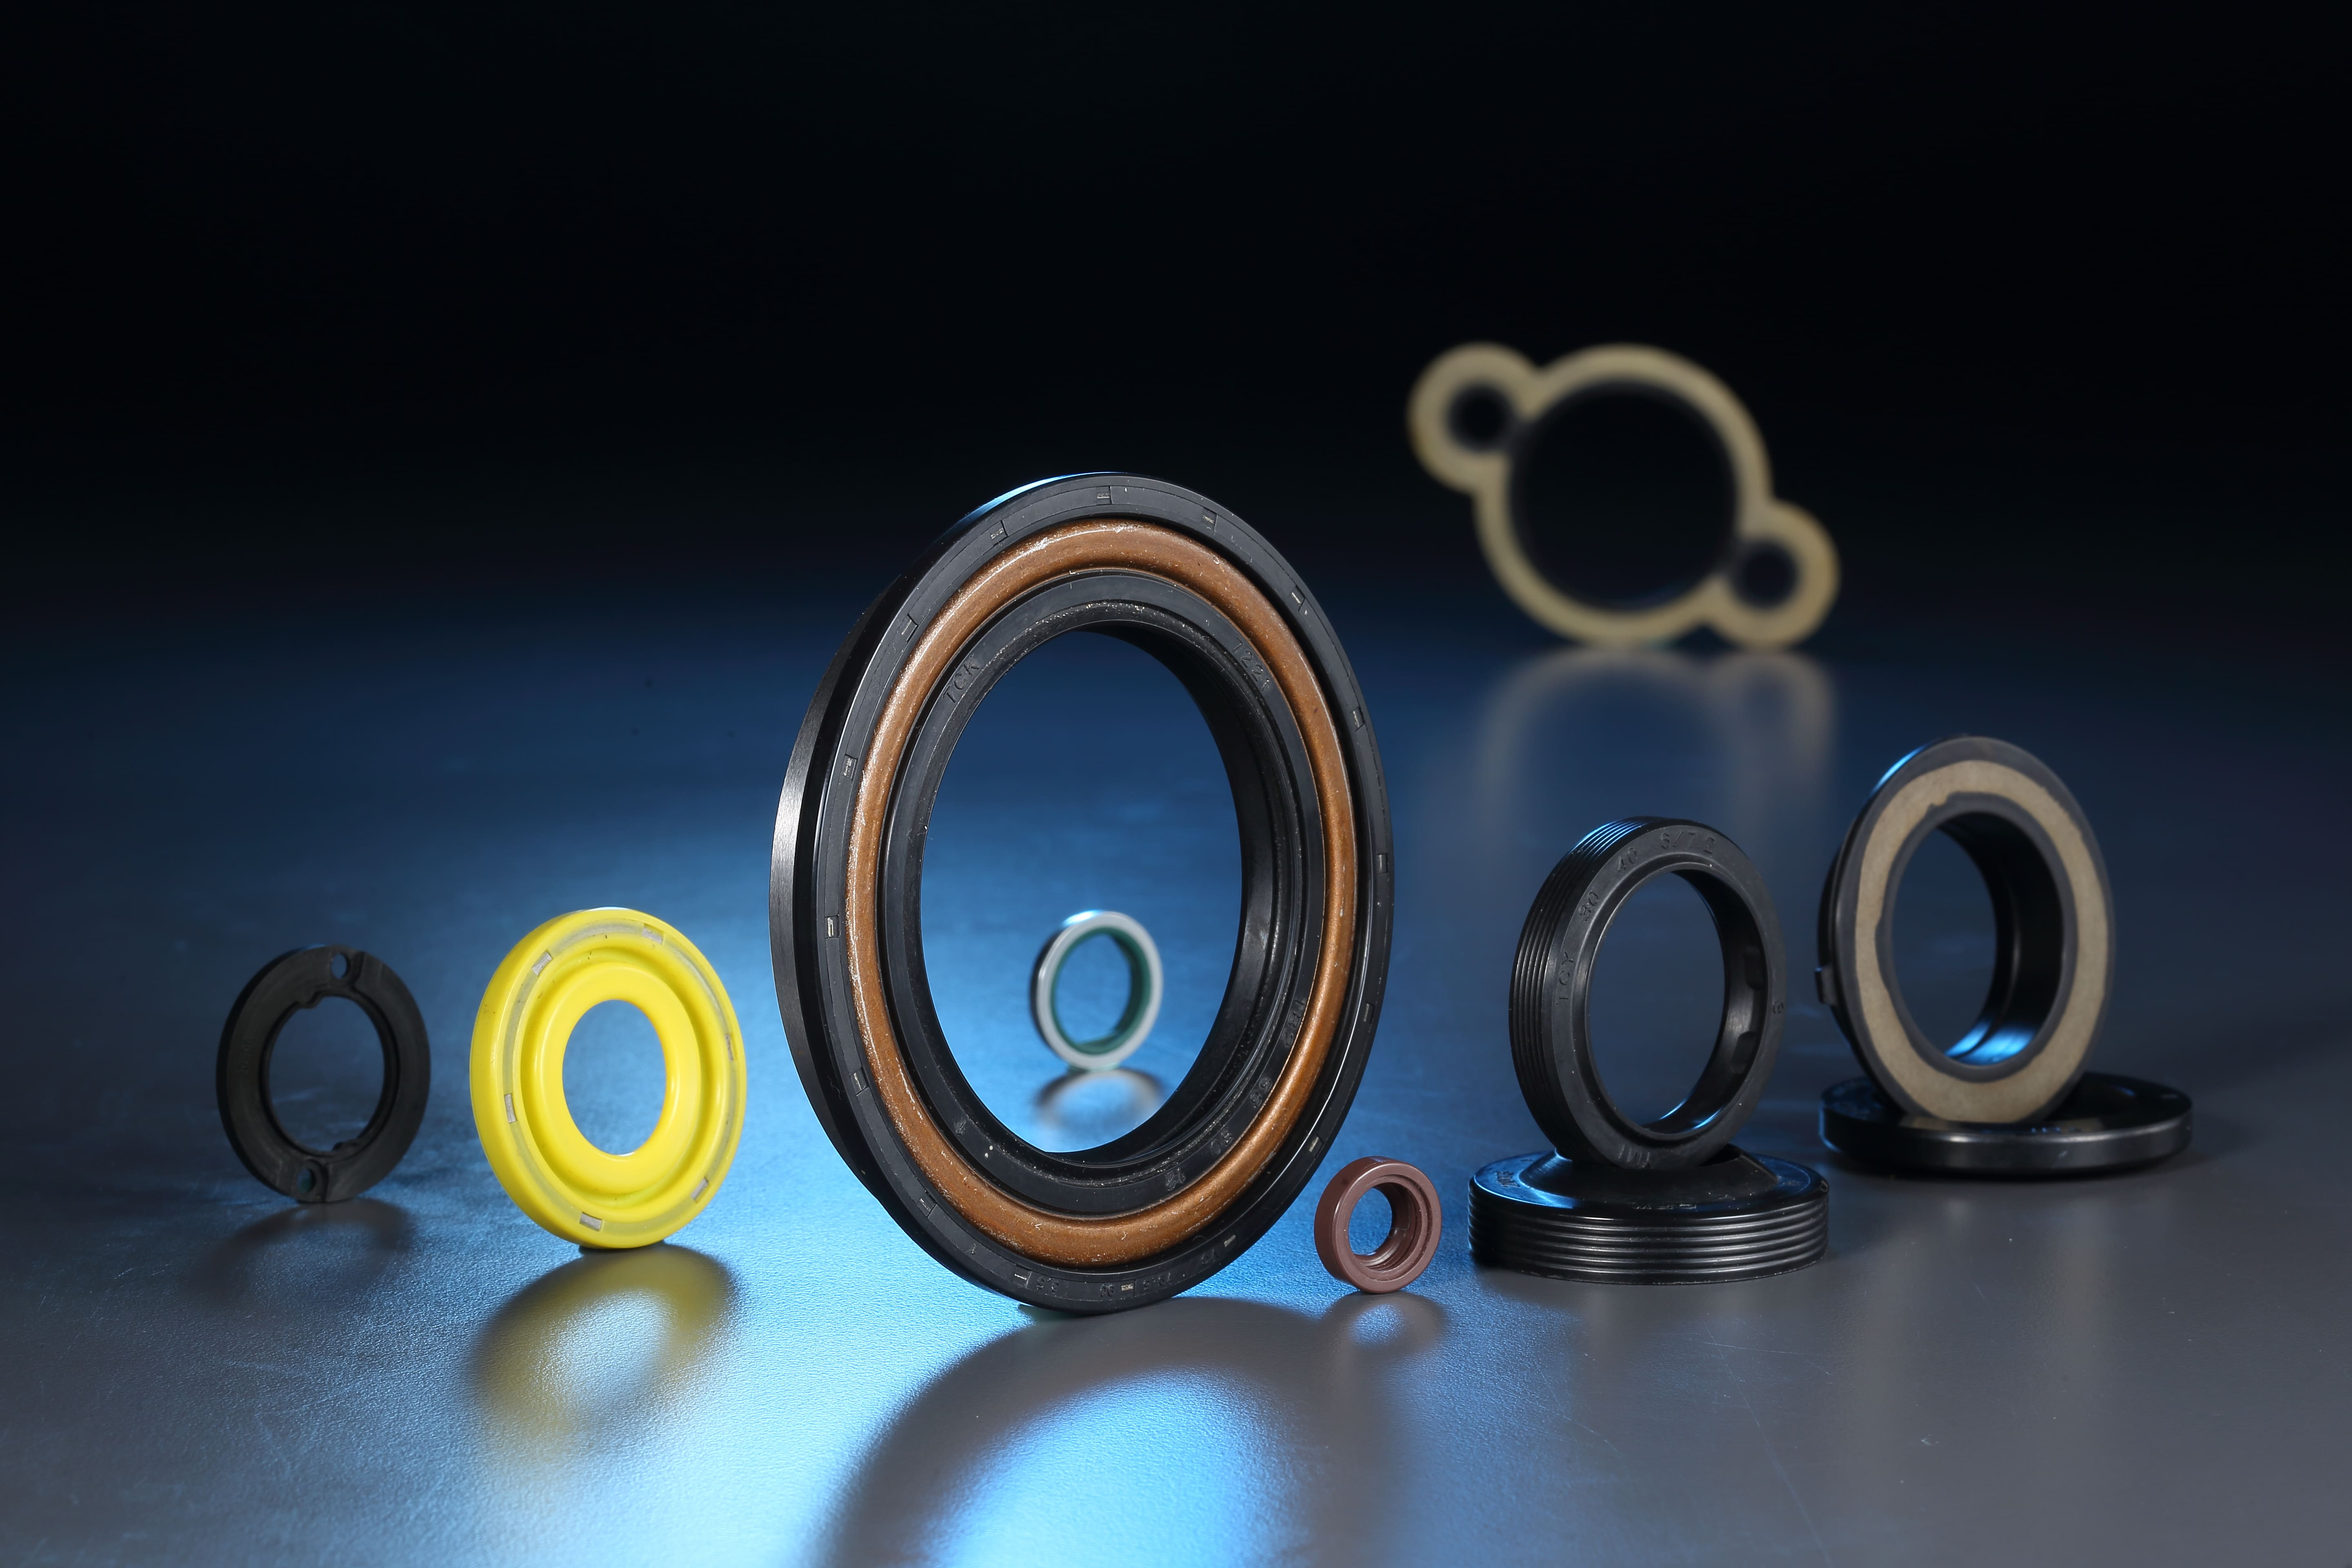 4x4 Pick Up Oil Seal for Rubber, Plastic Parts made by Yee Ming Ying Co., LTD.　昱銘穎有限公司 - MatchSupplier.com